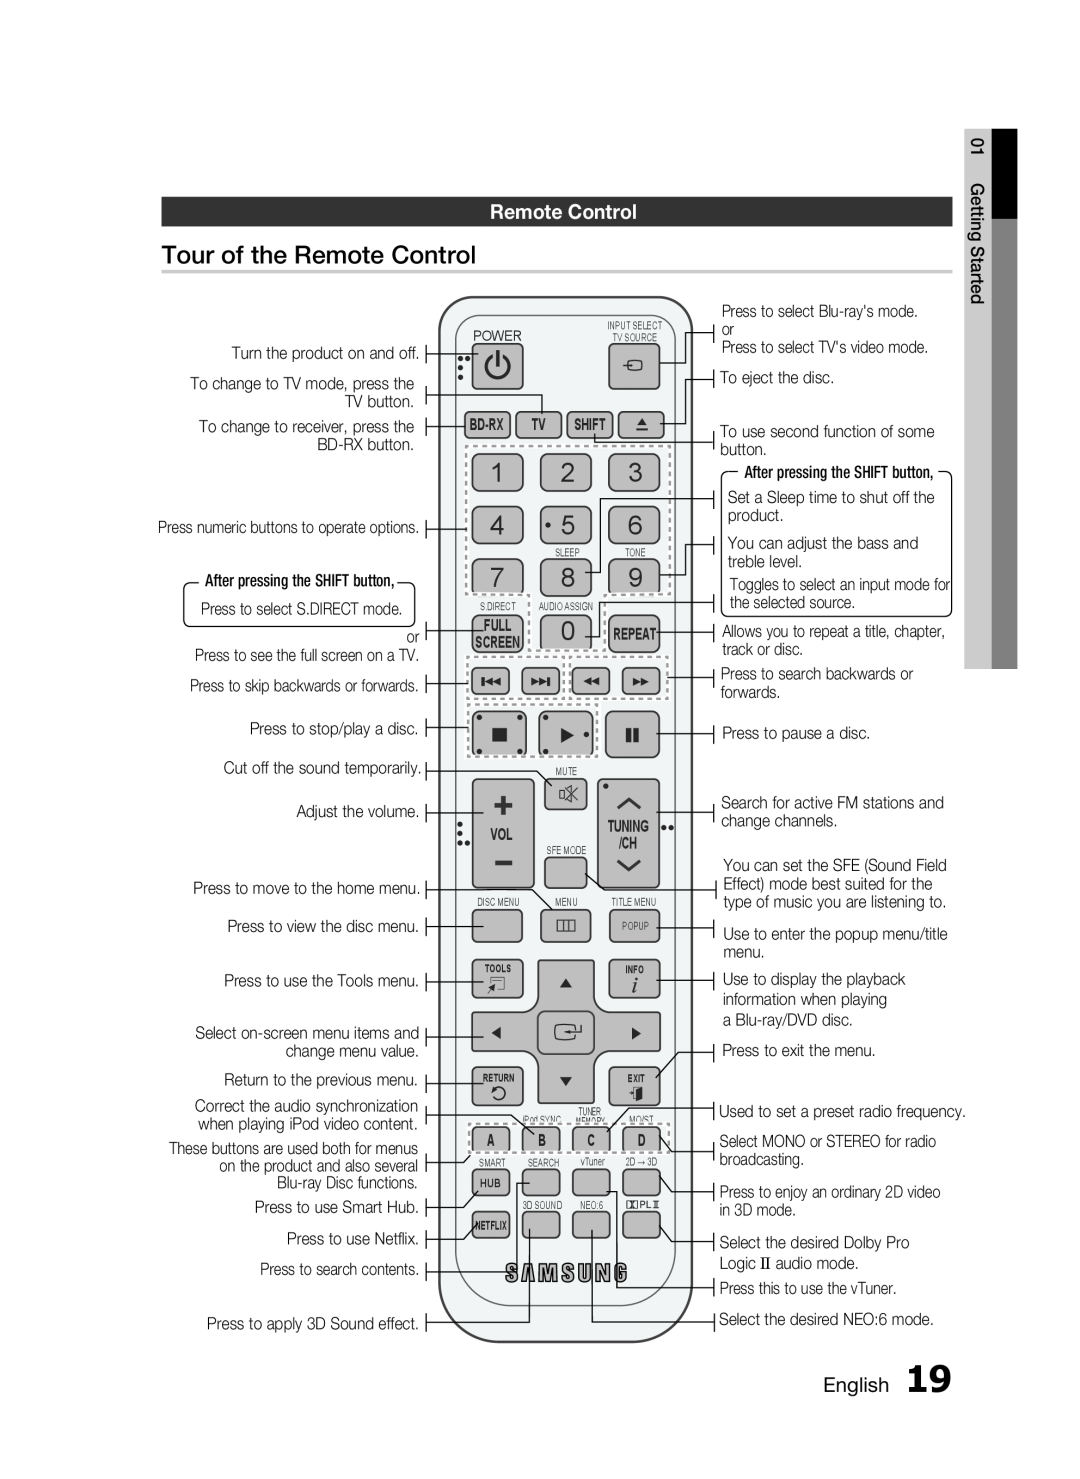 Samsung HW-D7000 user manual Tour of the Remote Control 